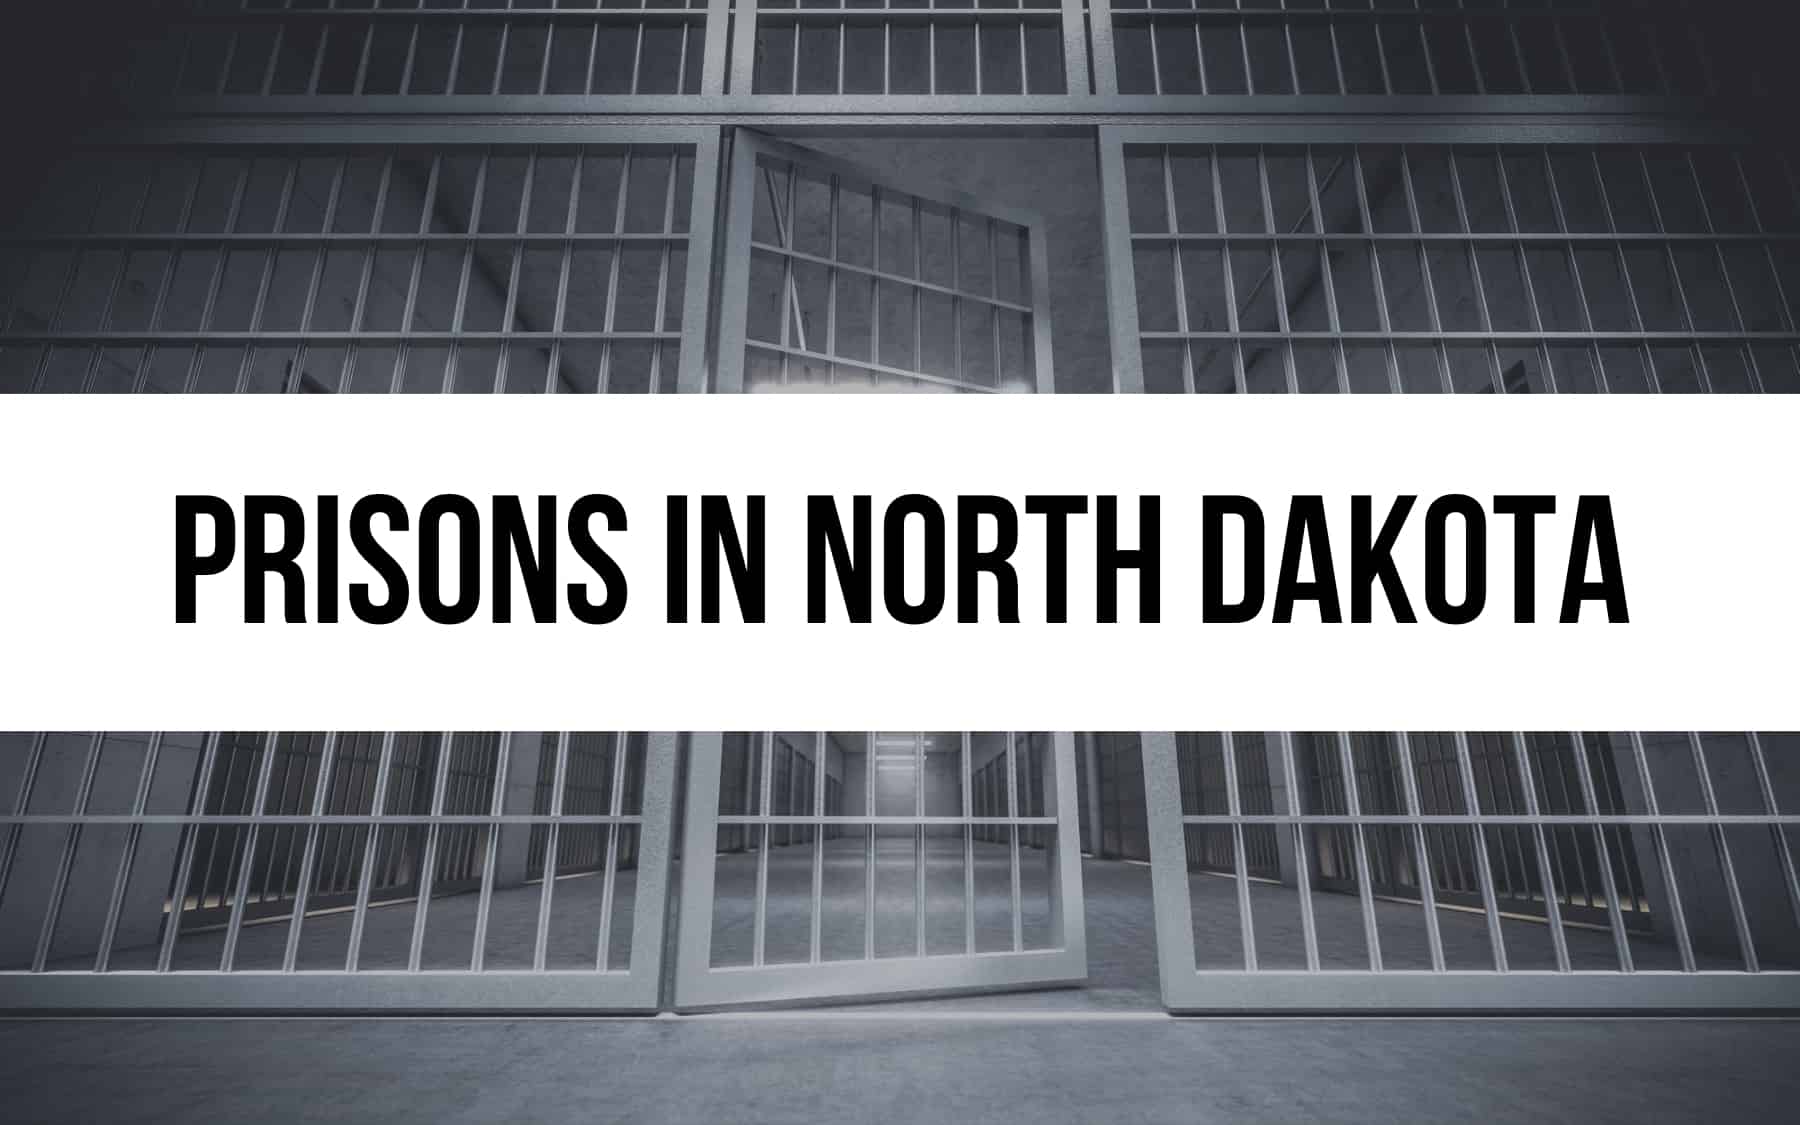 5 Prisons in North Dakota: Facilities, Stats, and Programs